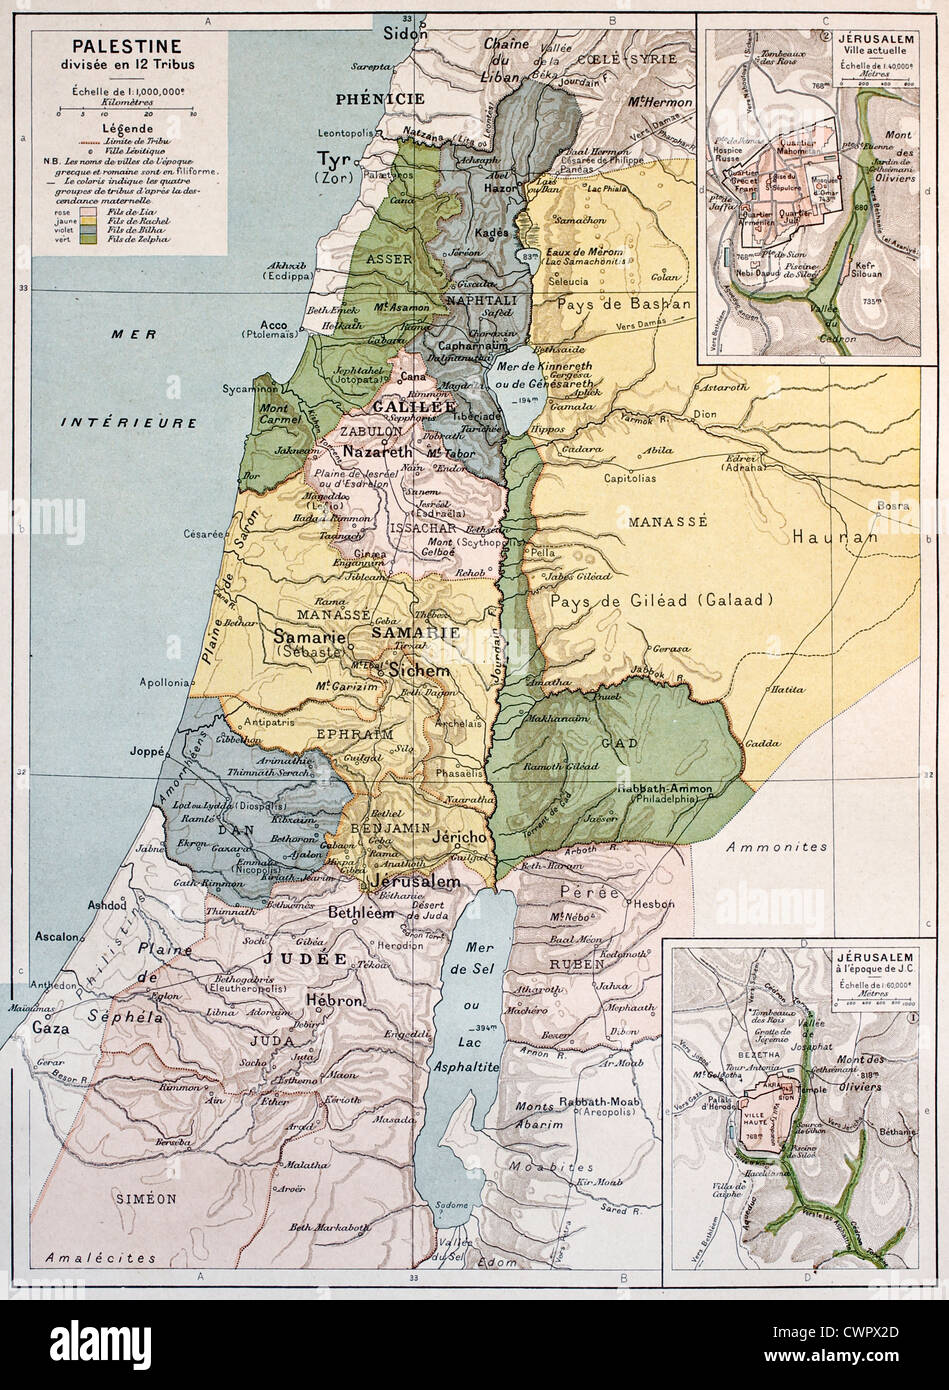 Palestine tribes old map Stock Photo